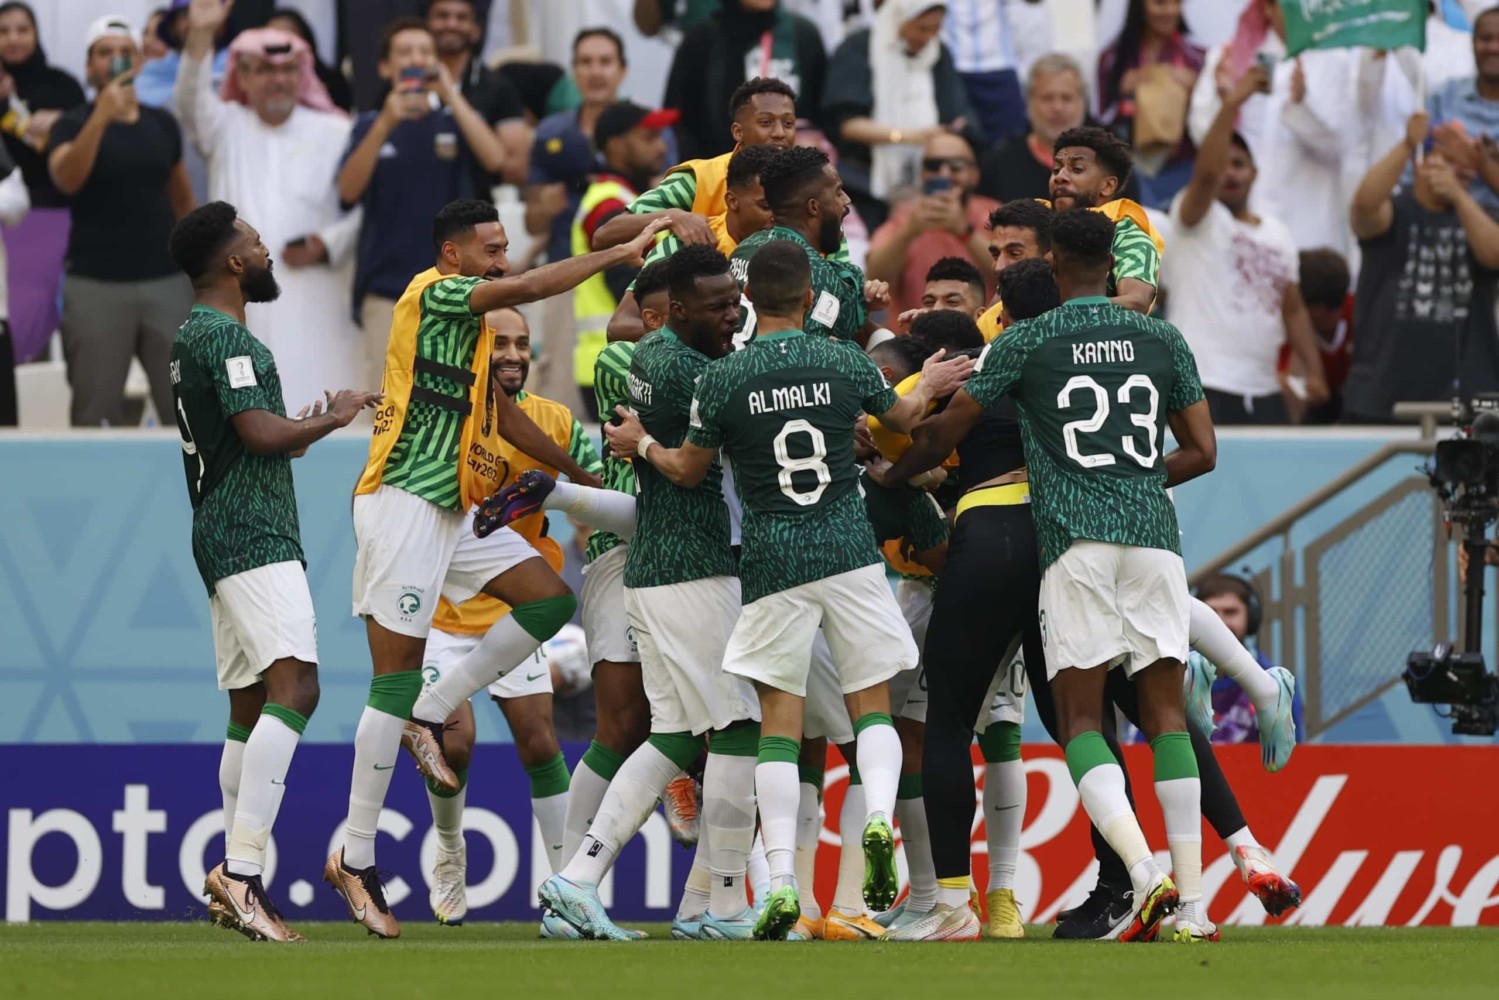 Saudi Arabia team celebrates after beating Argentina in World Cup match